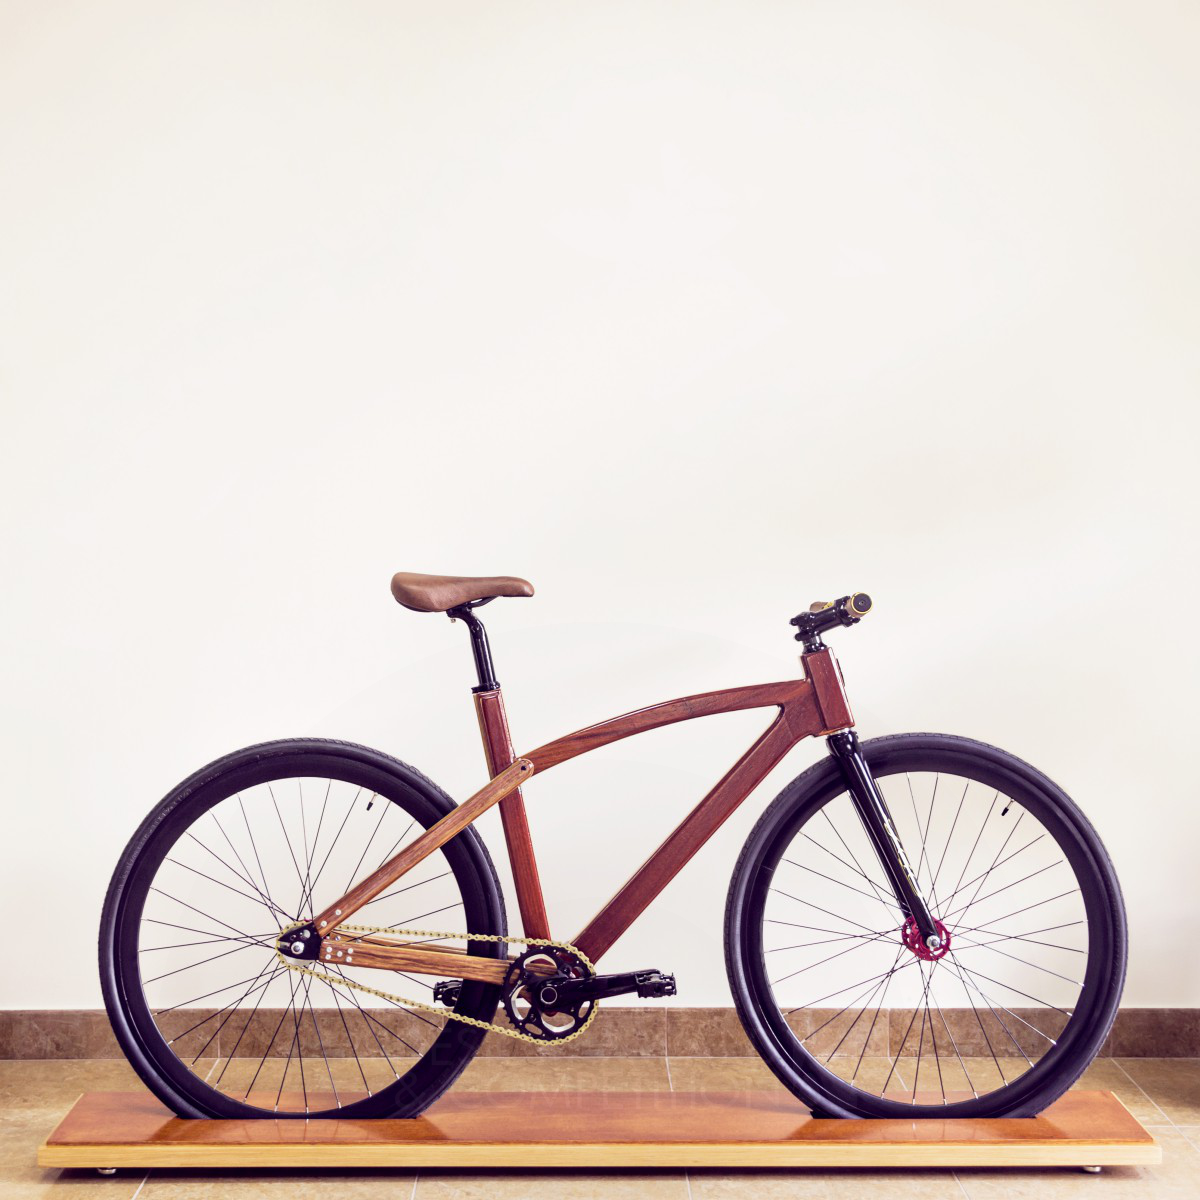 FRB Custom <b>Wooden Bicycle